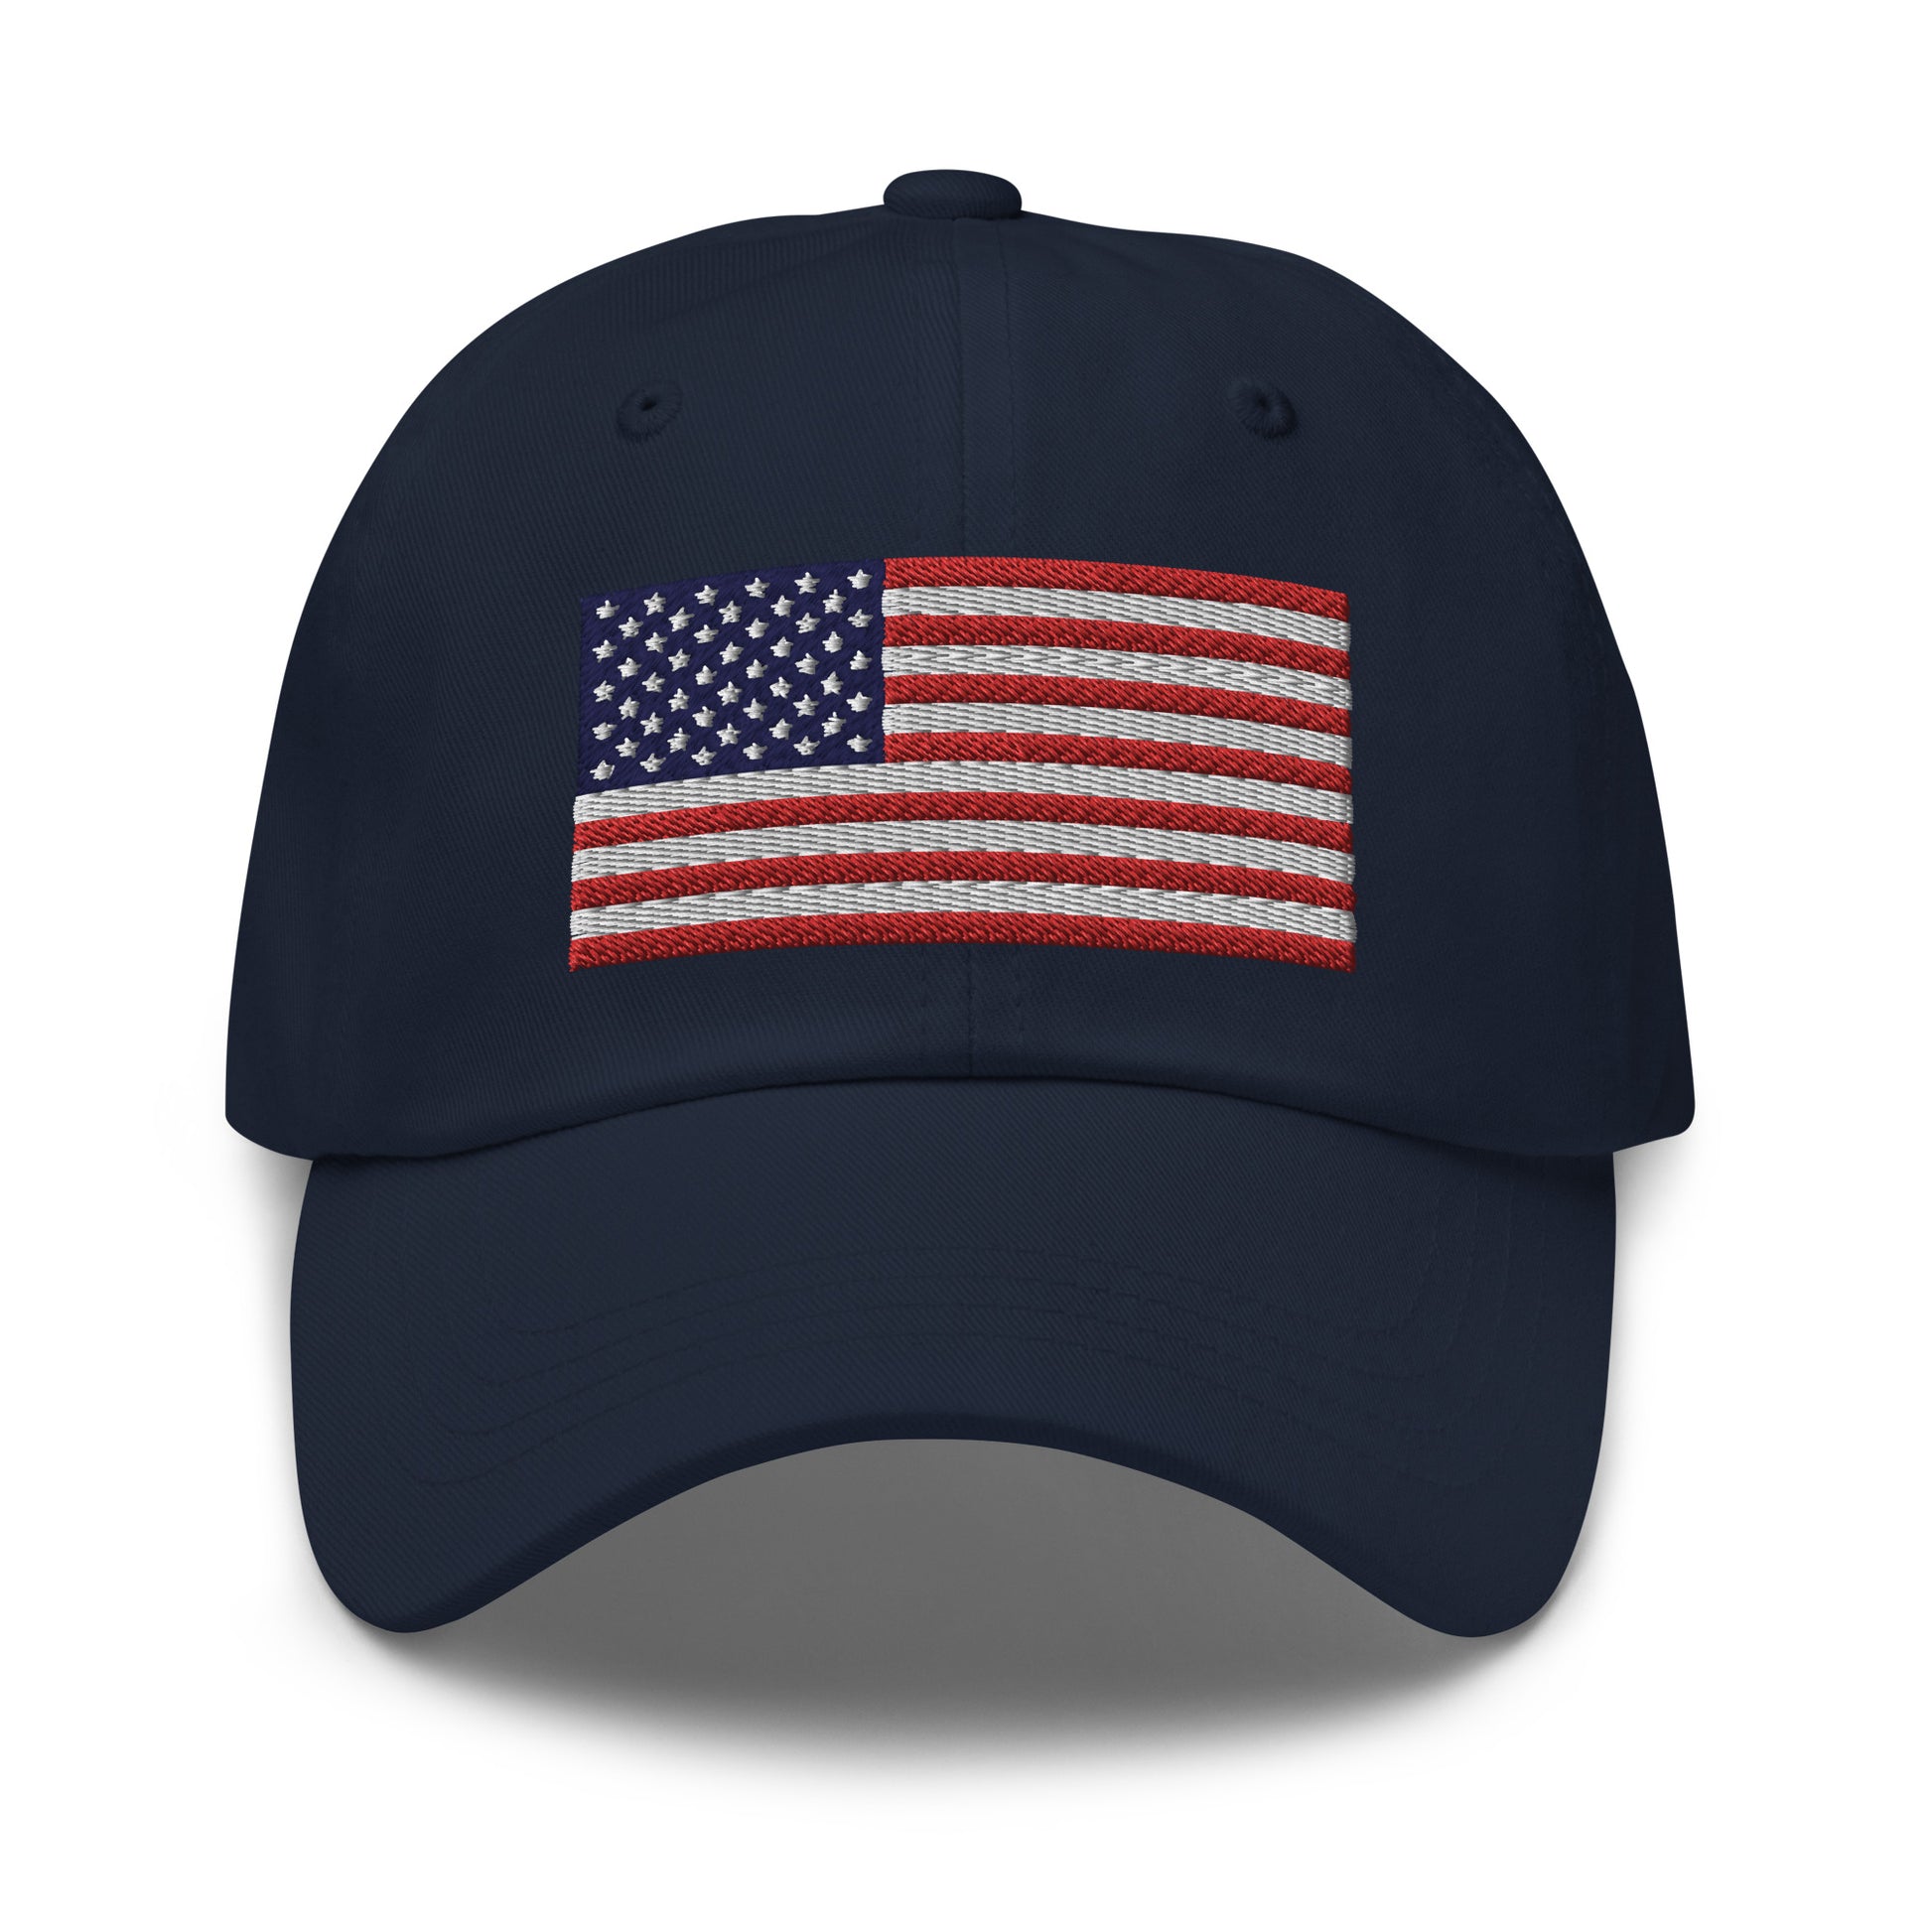 Dad hat embroidered with USA, perfect for casual wear. Navy color.